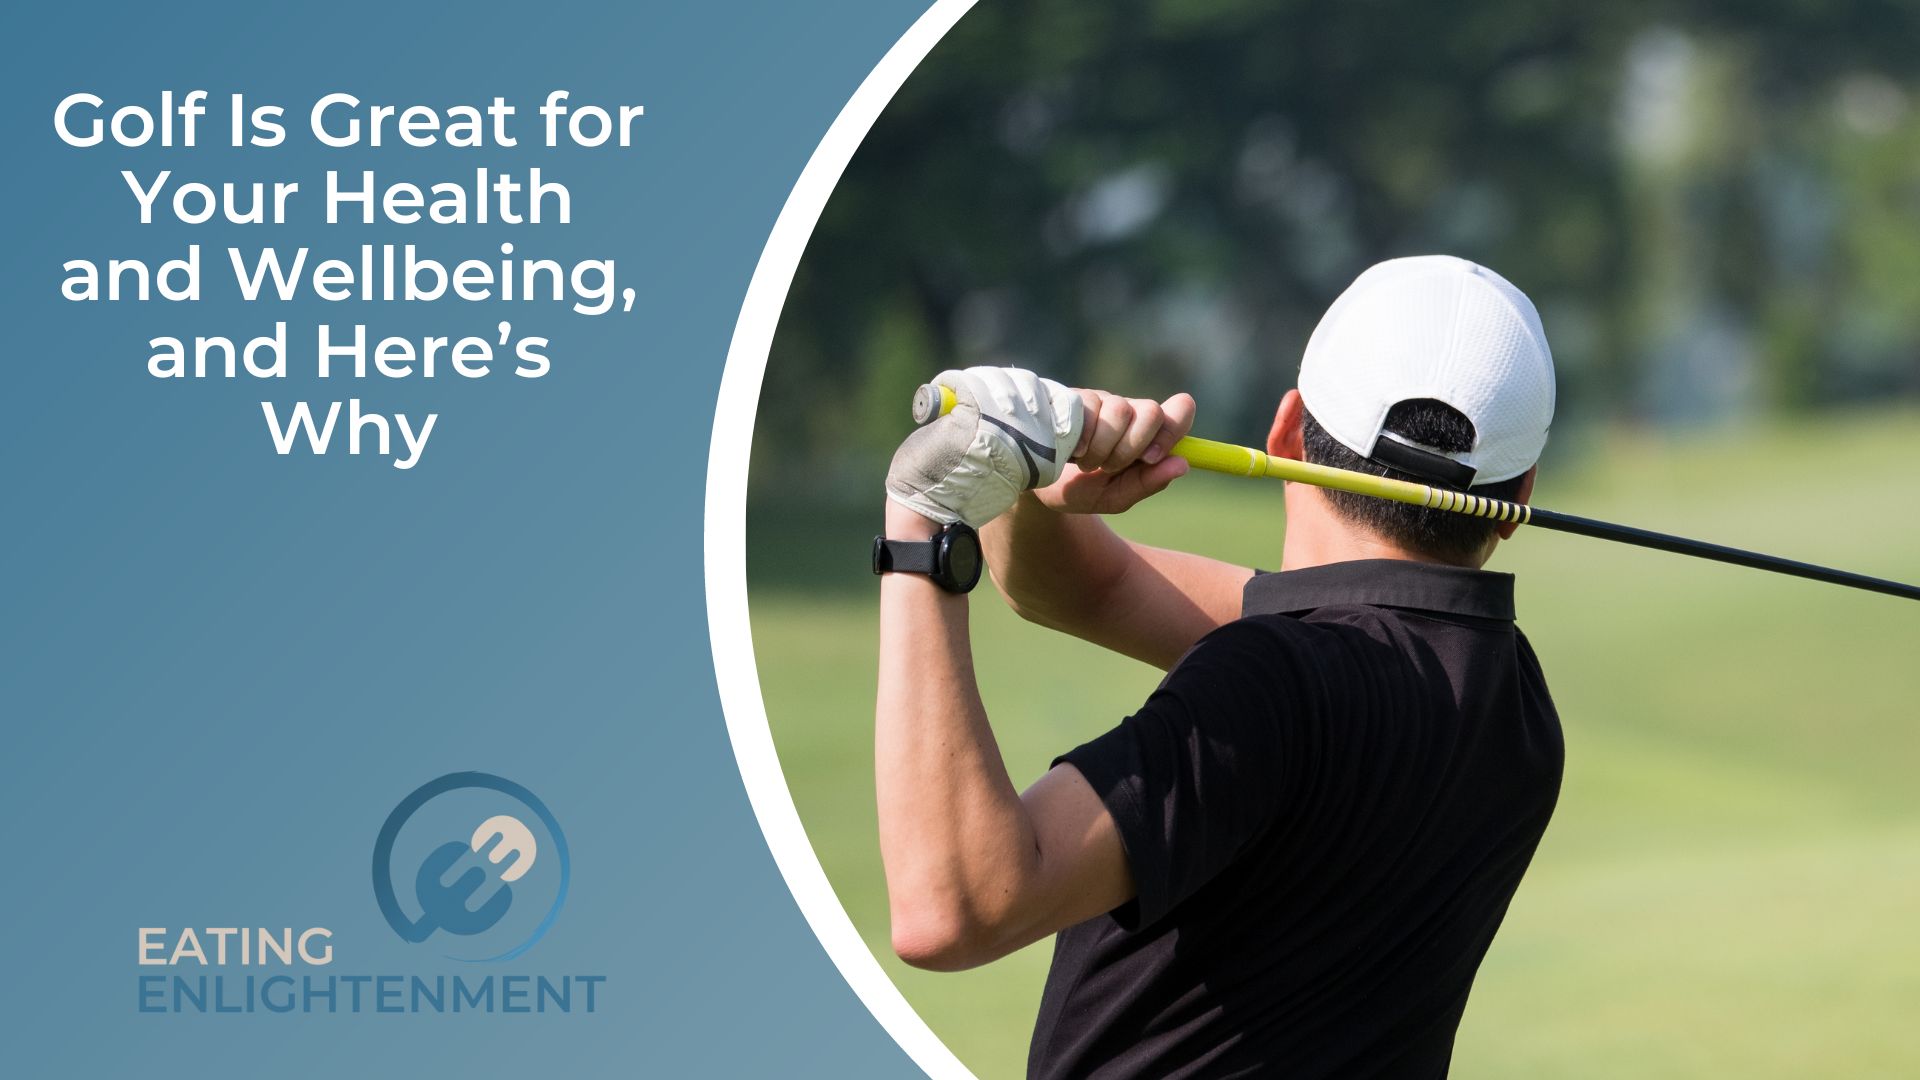 Golf Is Great for Your Health and Wellbeing, and Here’s Why